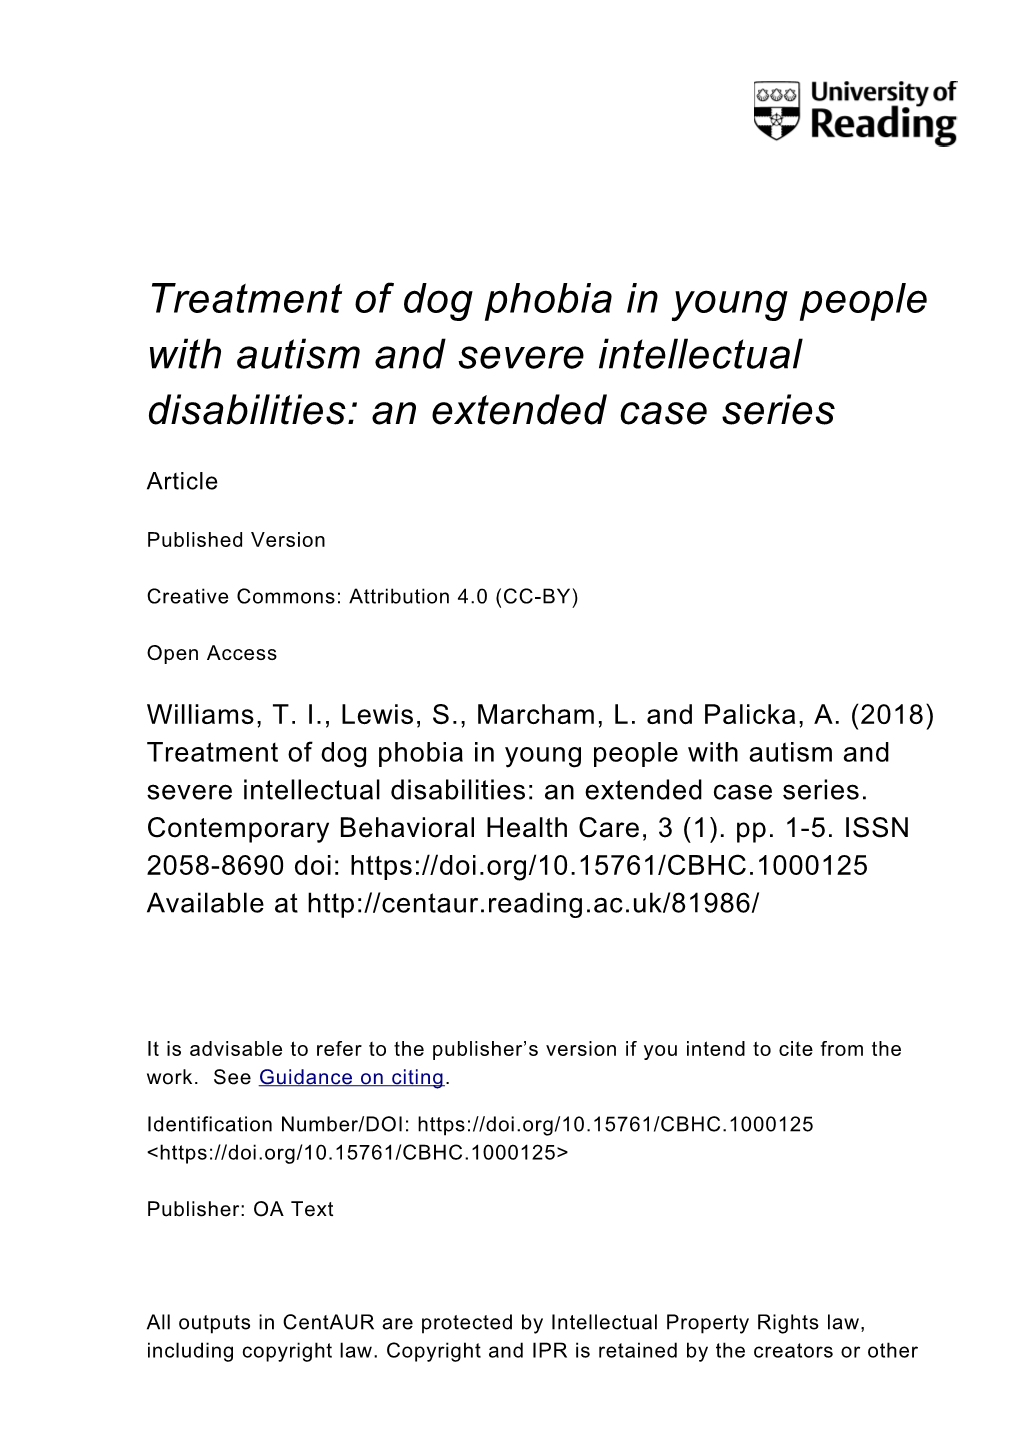 Treatment of Dog Phobia in Young People with Autism and Severe Intellectual Disabilities: an Extended Case Series